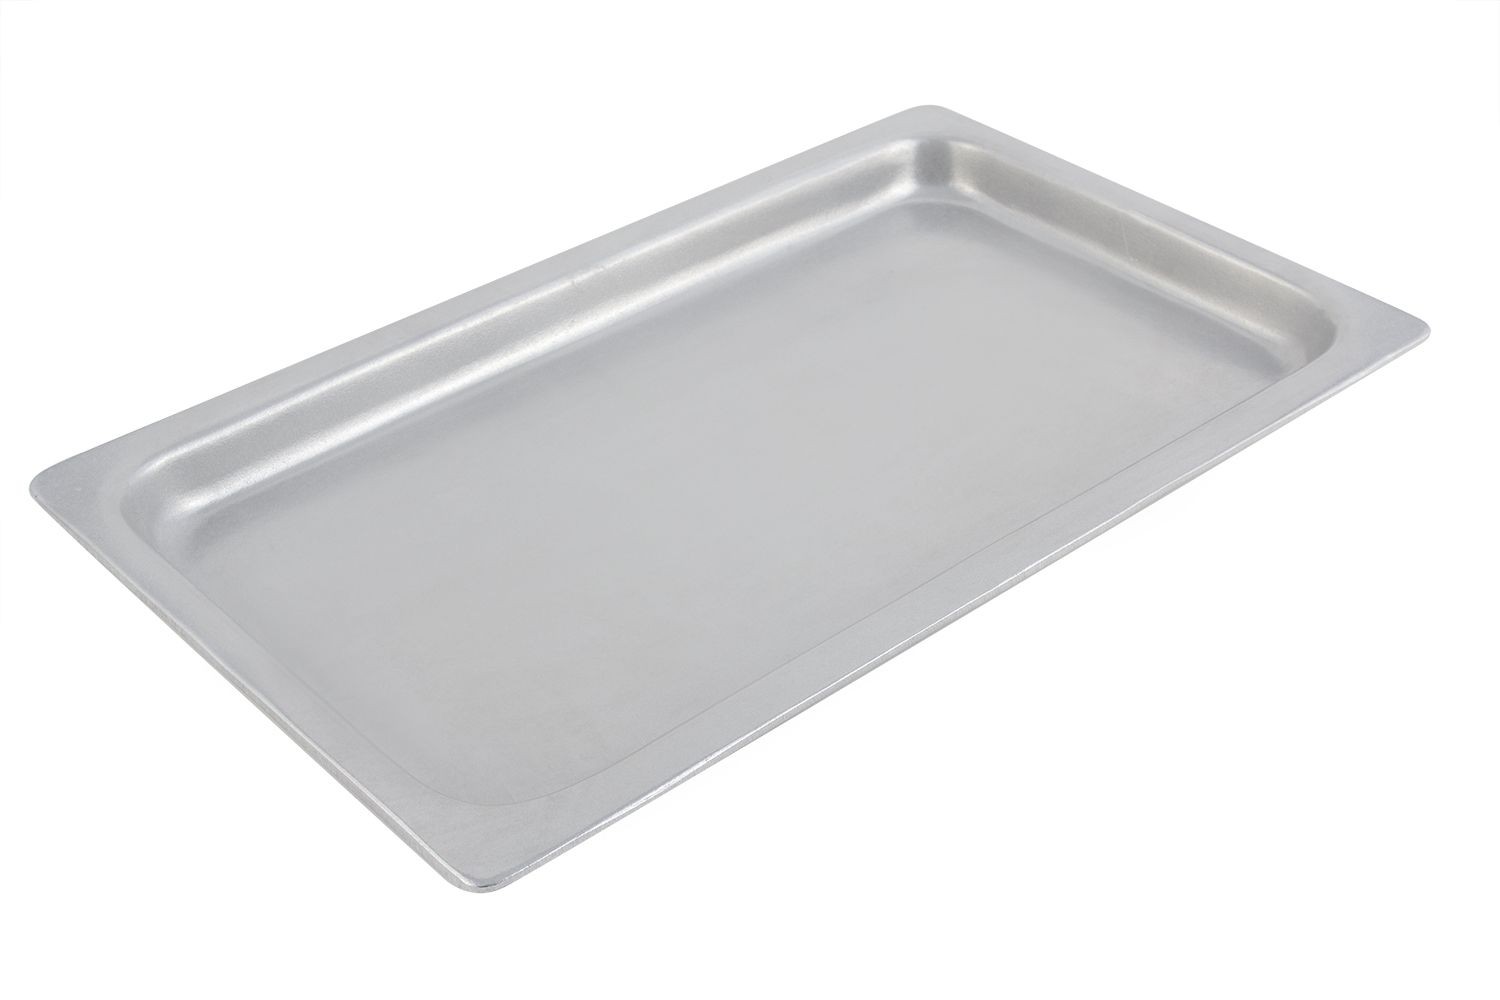 Bon Chef 5098P Full-Size Shallow Food Pan, Pewter Glo 5 Qt.